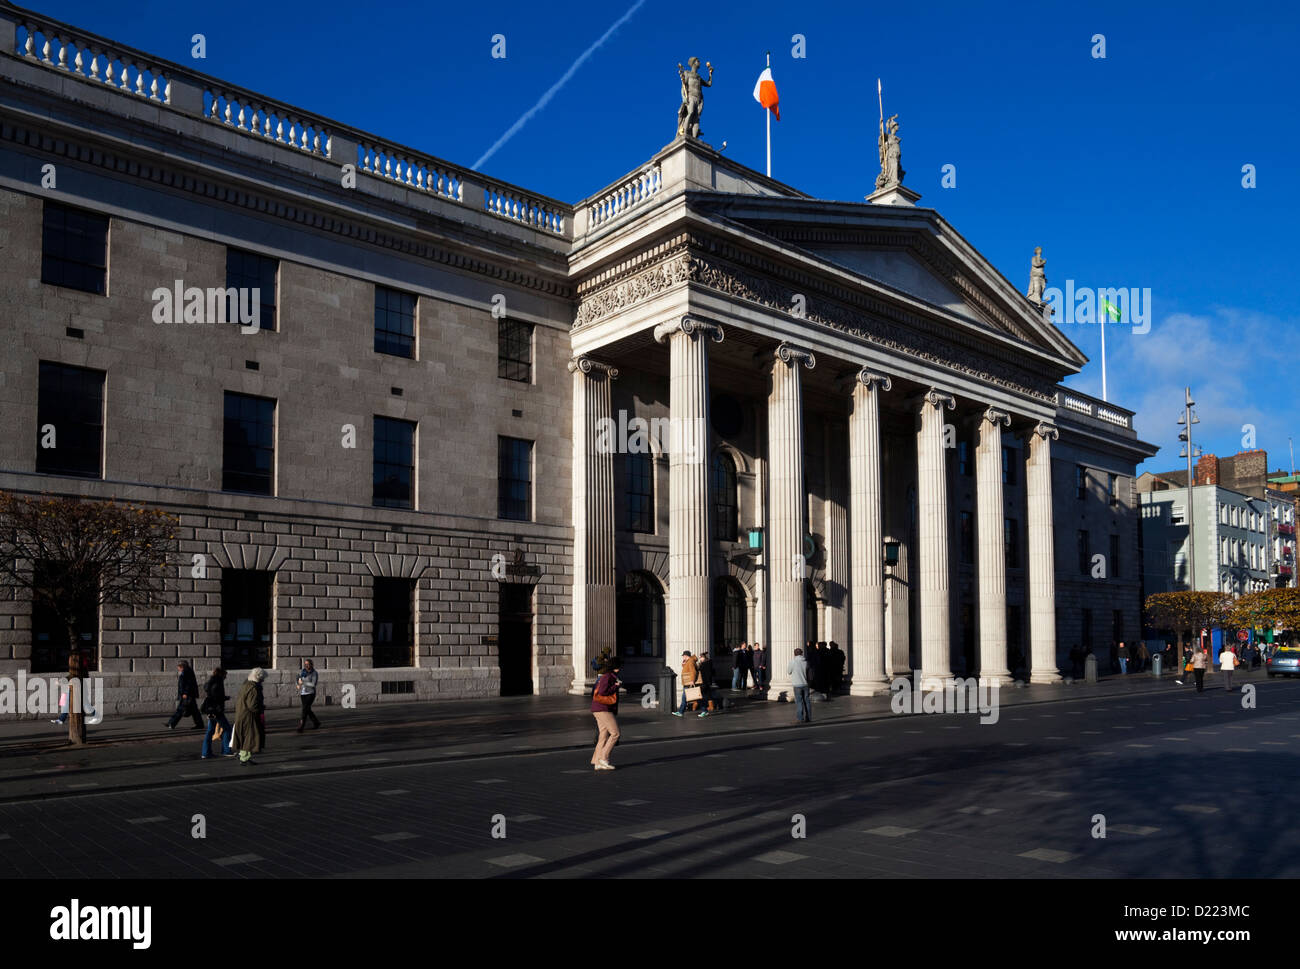 Das General Post Office (GPO) in der O' Connell Street in Dublin, Irland. Stockfoto